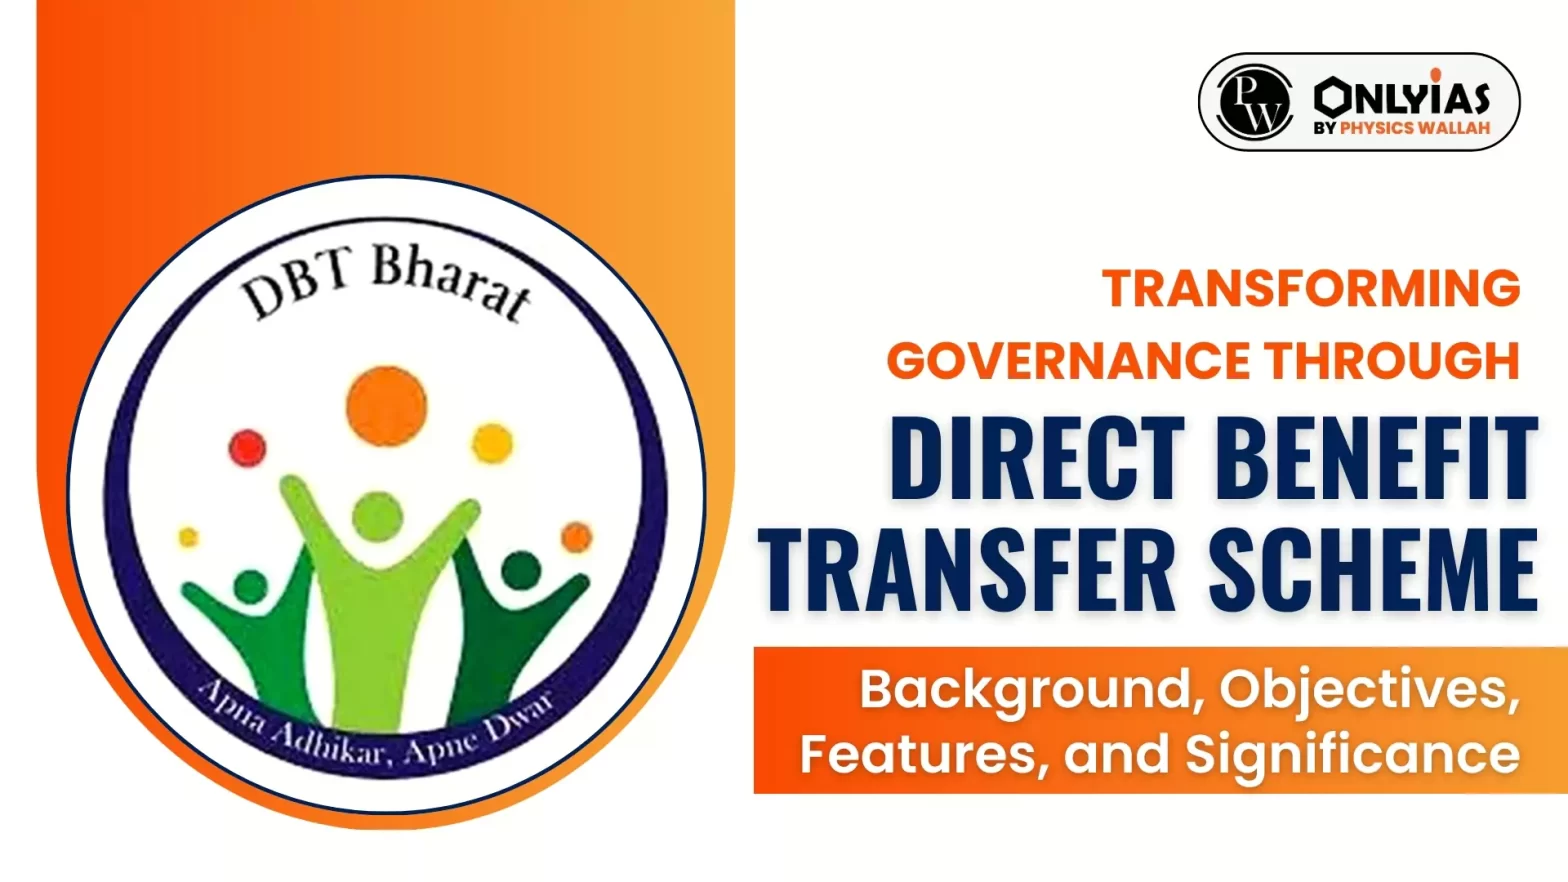 Direct Benefit Transfer Scheme: Background, Objectives, Features, and Significance